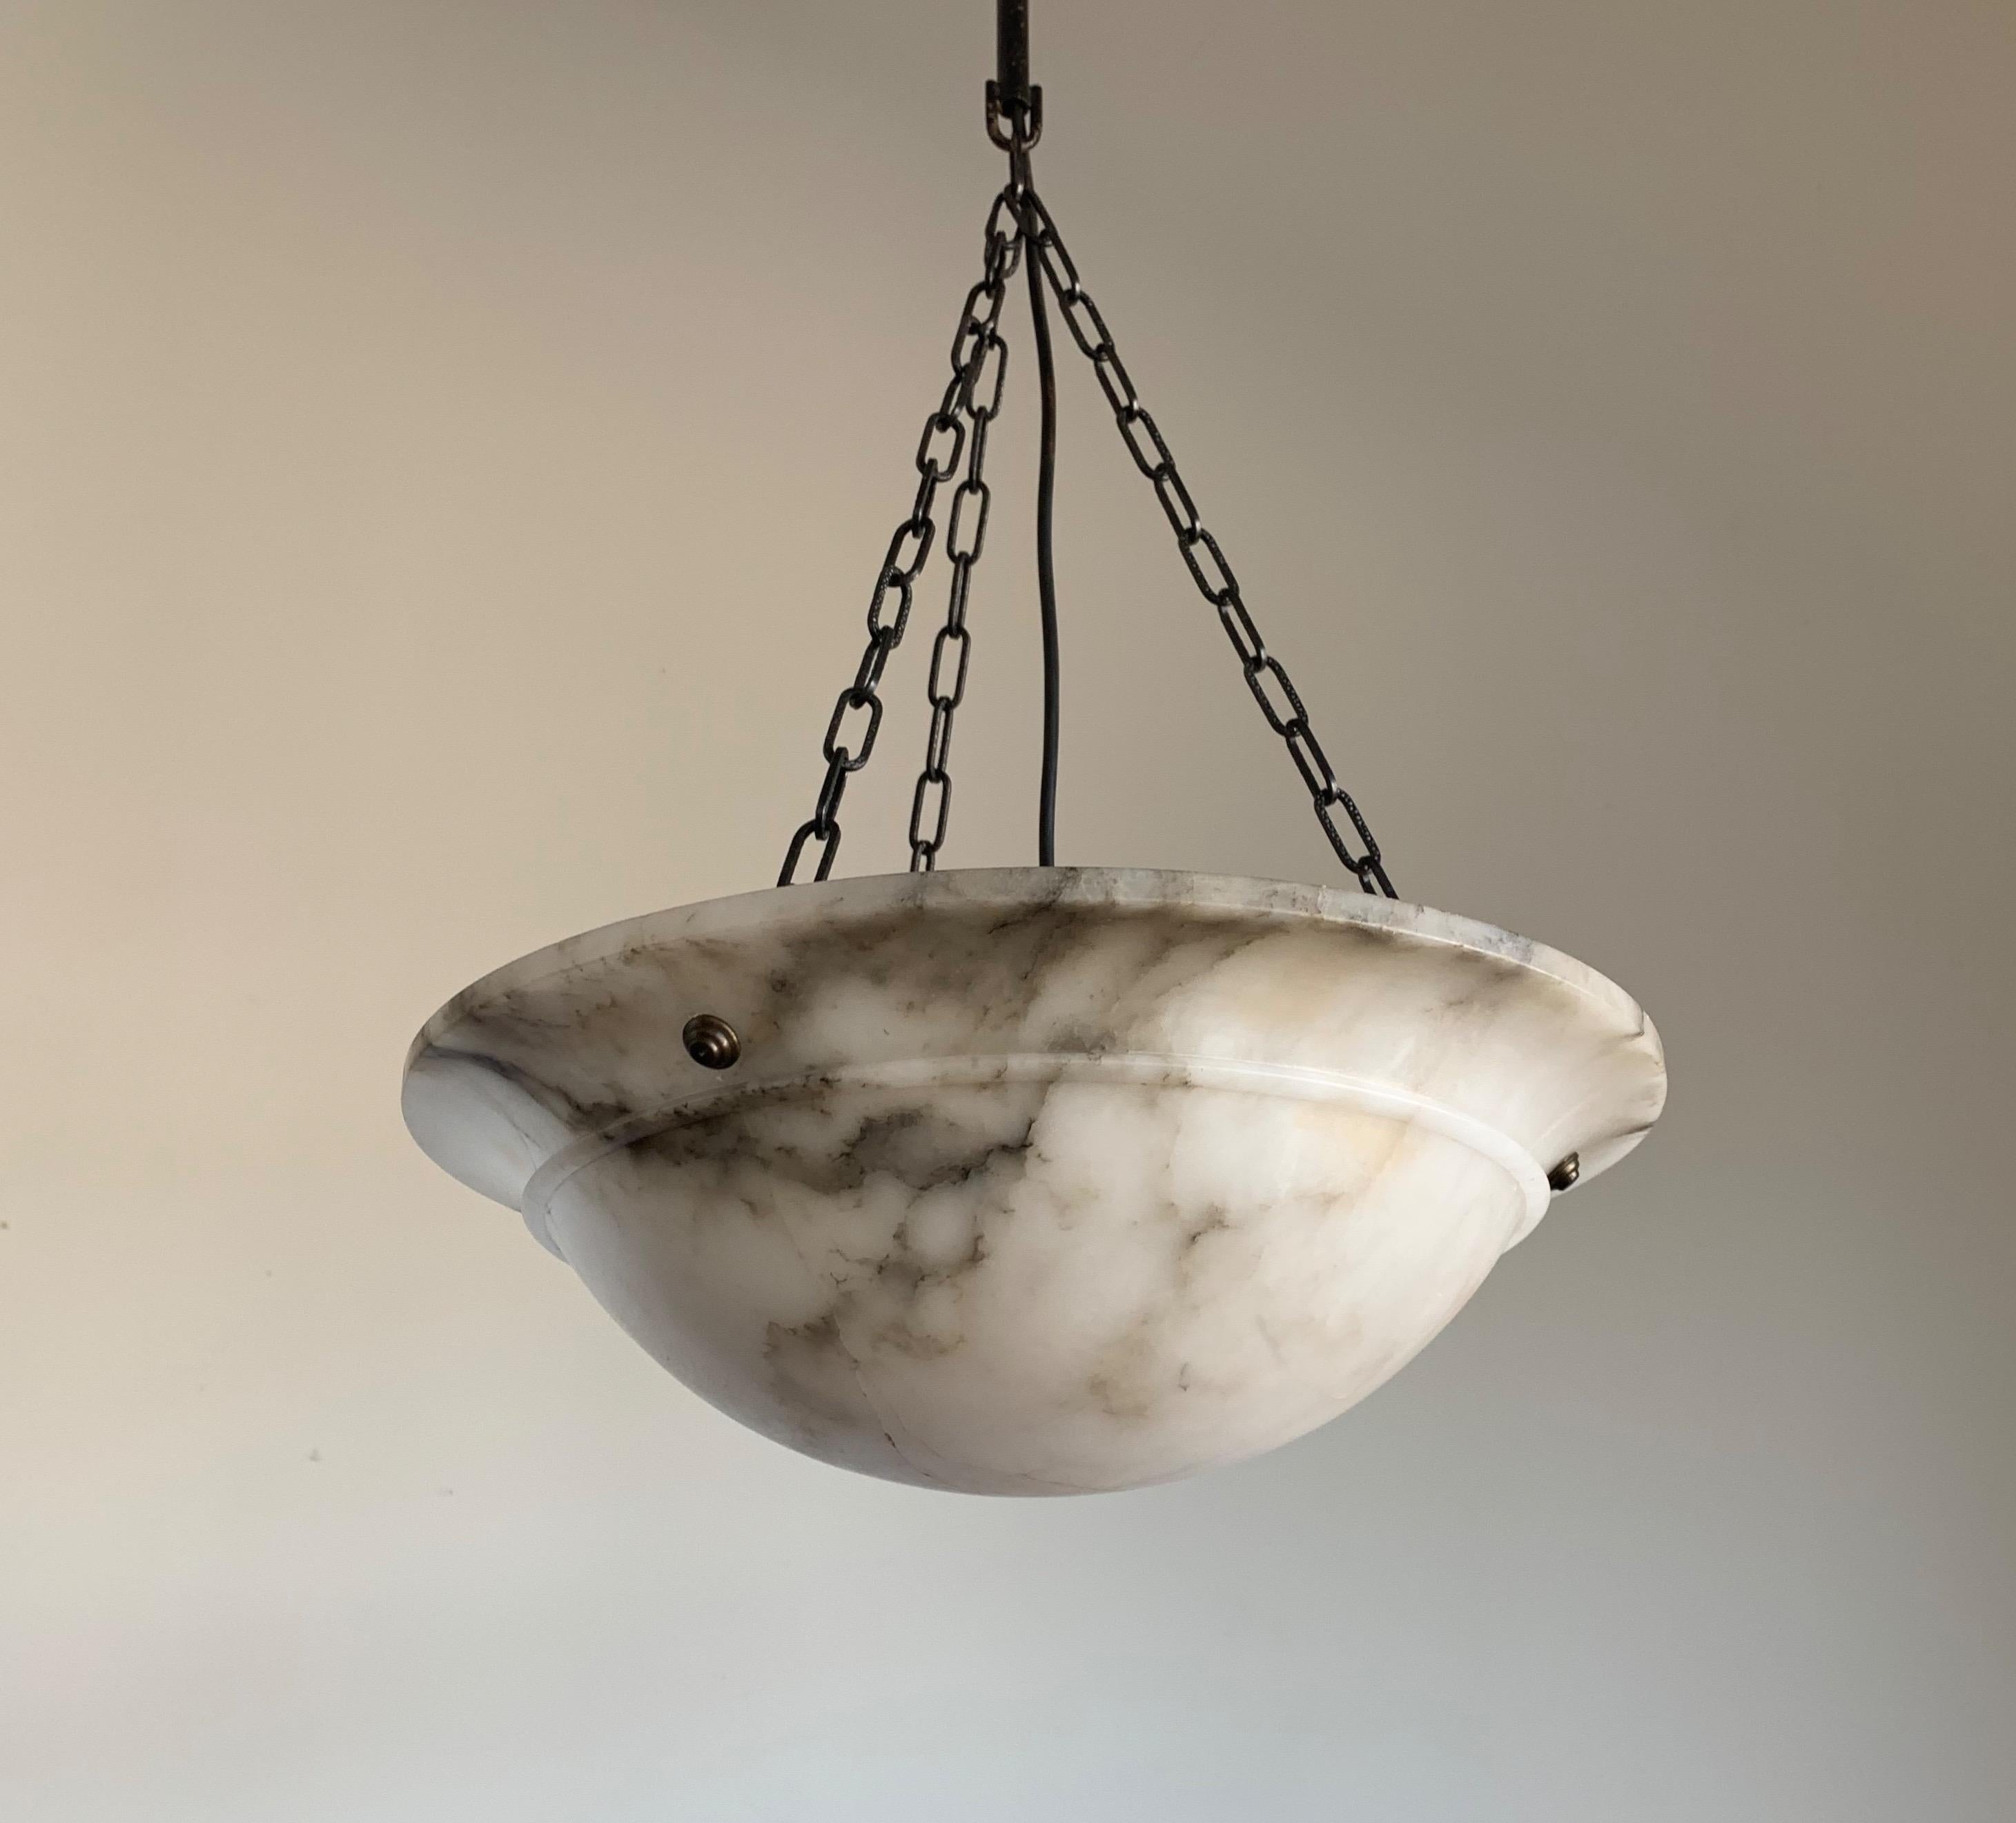 Beautiful design mineral stone pendant.

If you are looking for an excellent condition and practical size Art Deco light fixture then this fine specimen with its beautifully flowing black veins in the shade could be perfect for you. The shape of